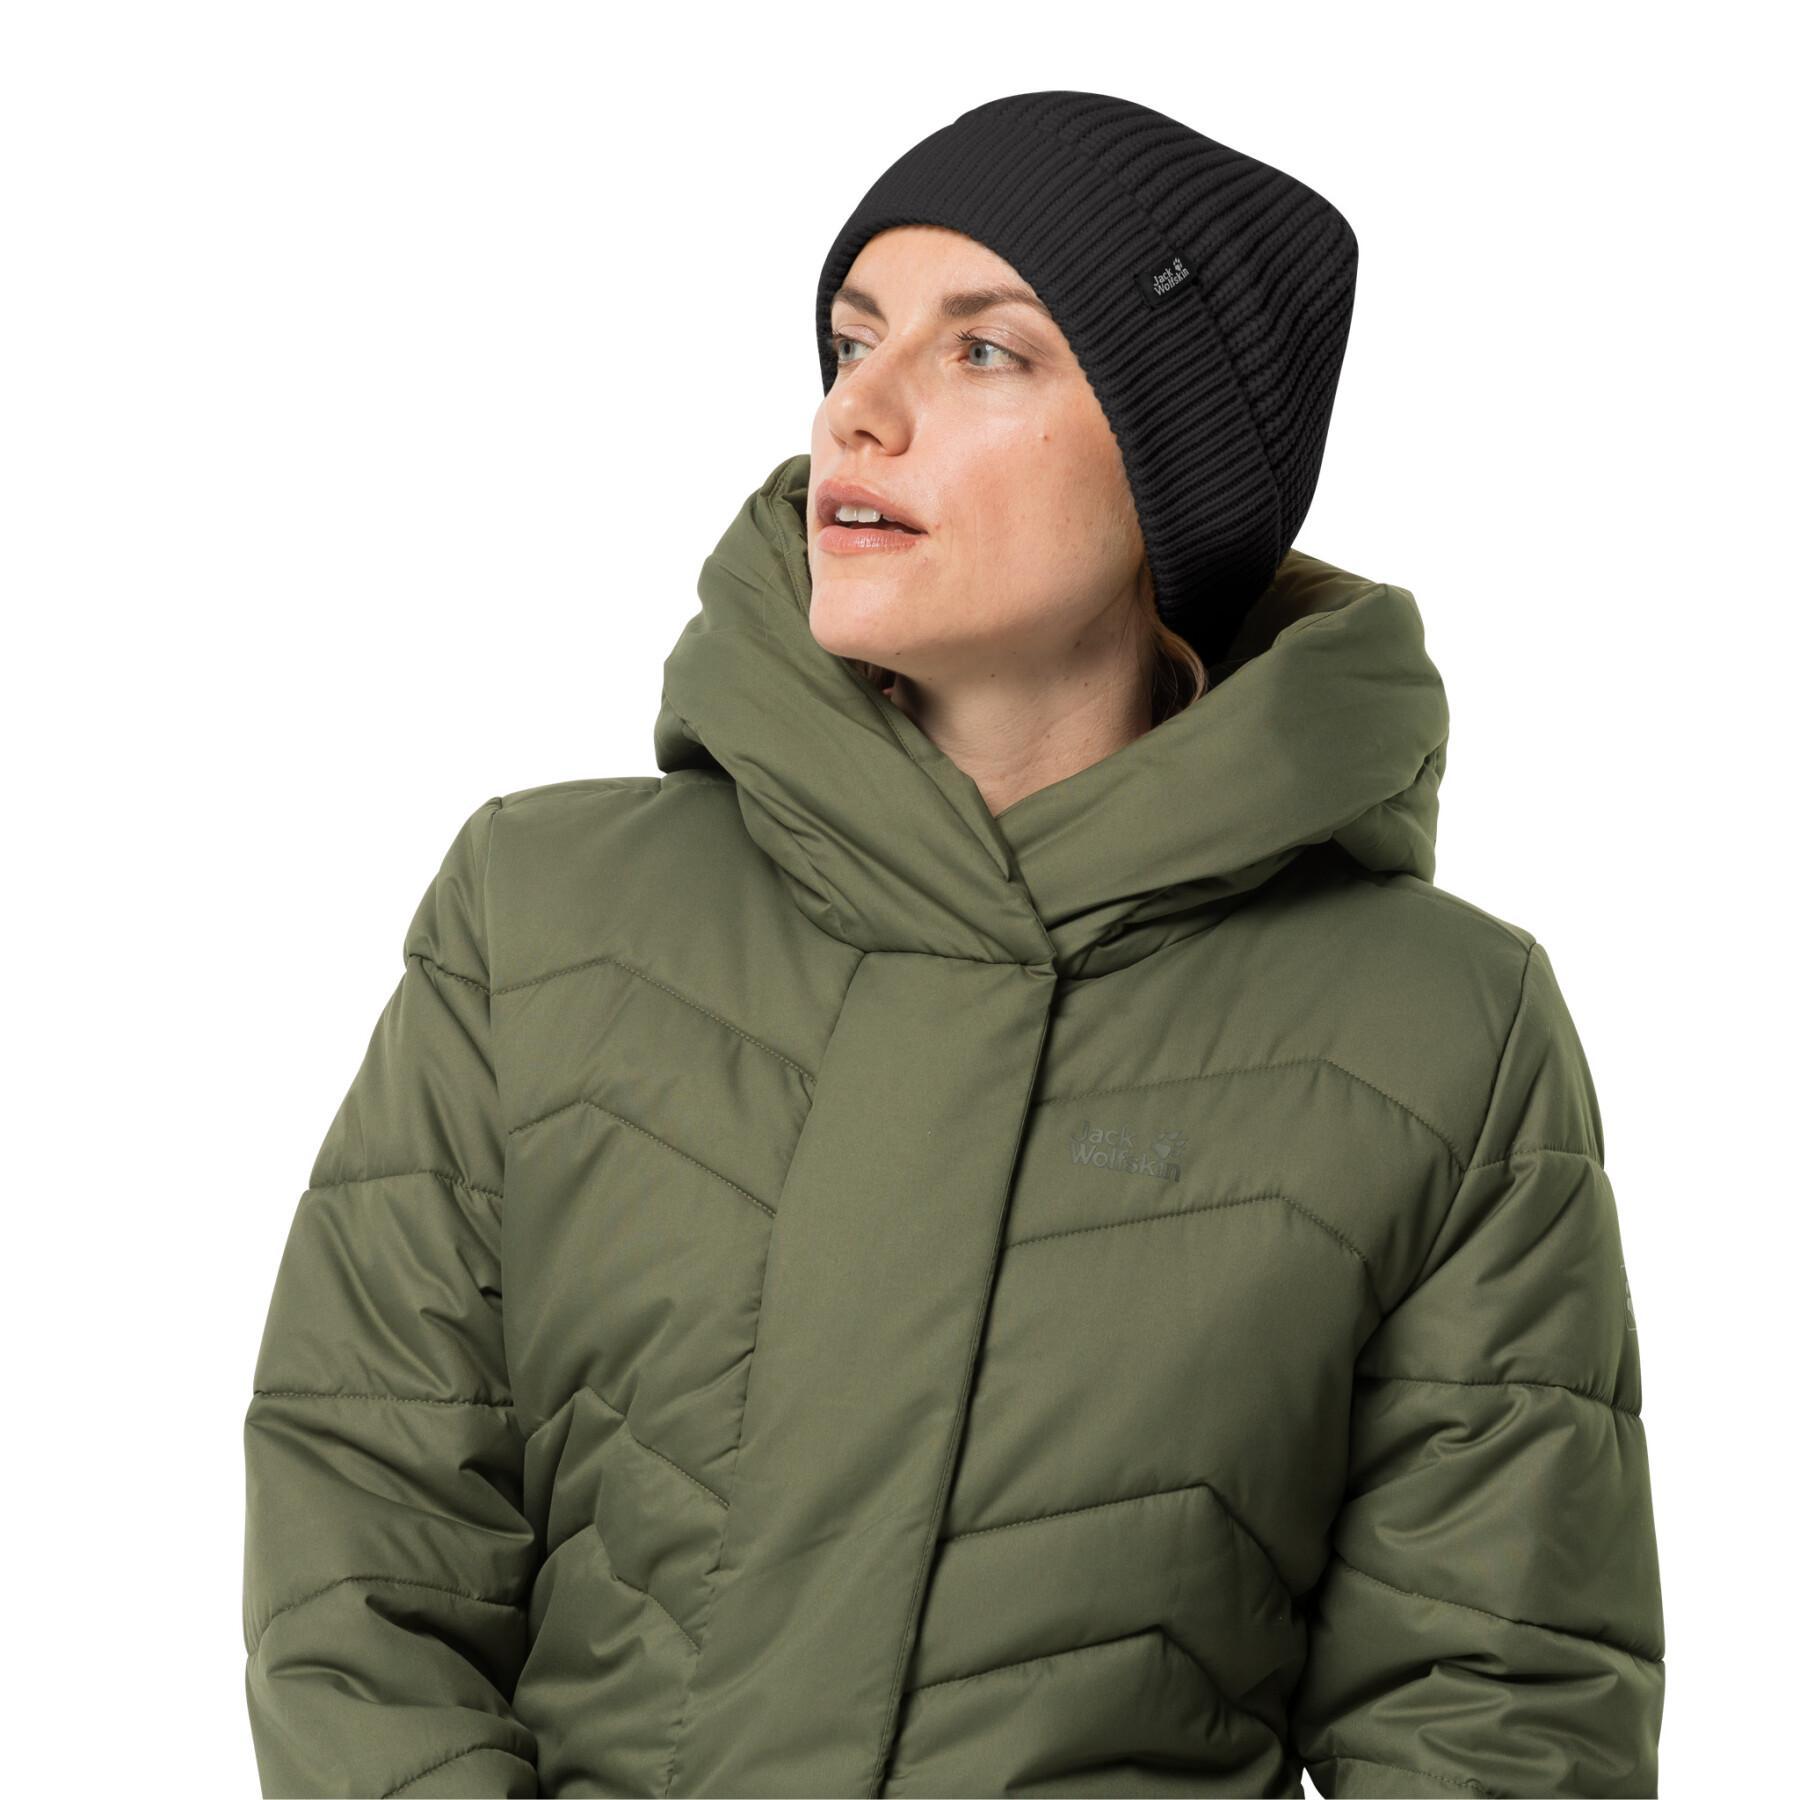 Cap Jack Wolfskin every day outdoors